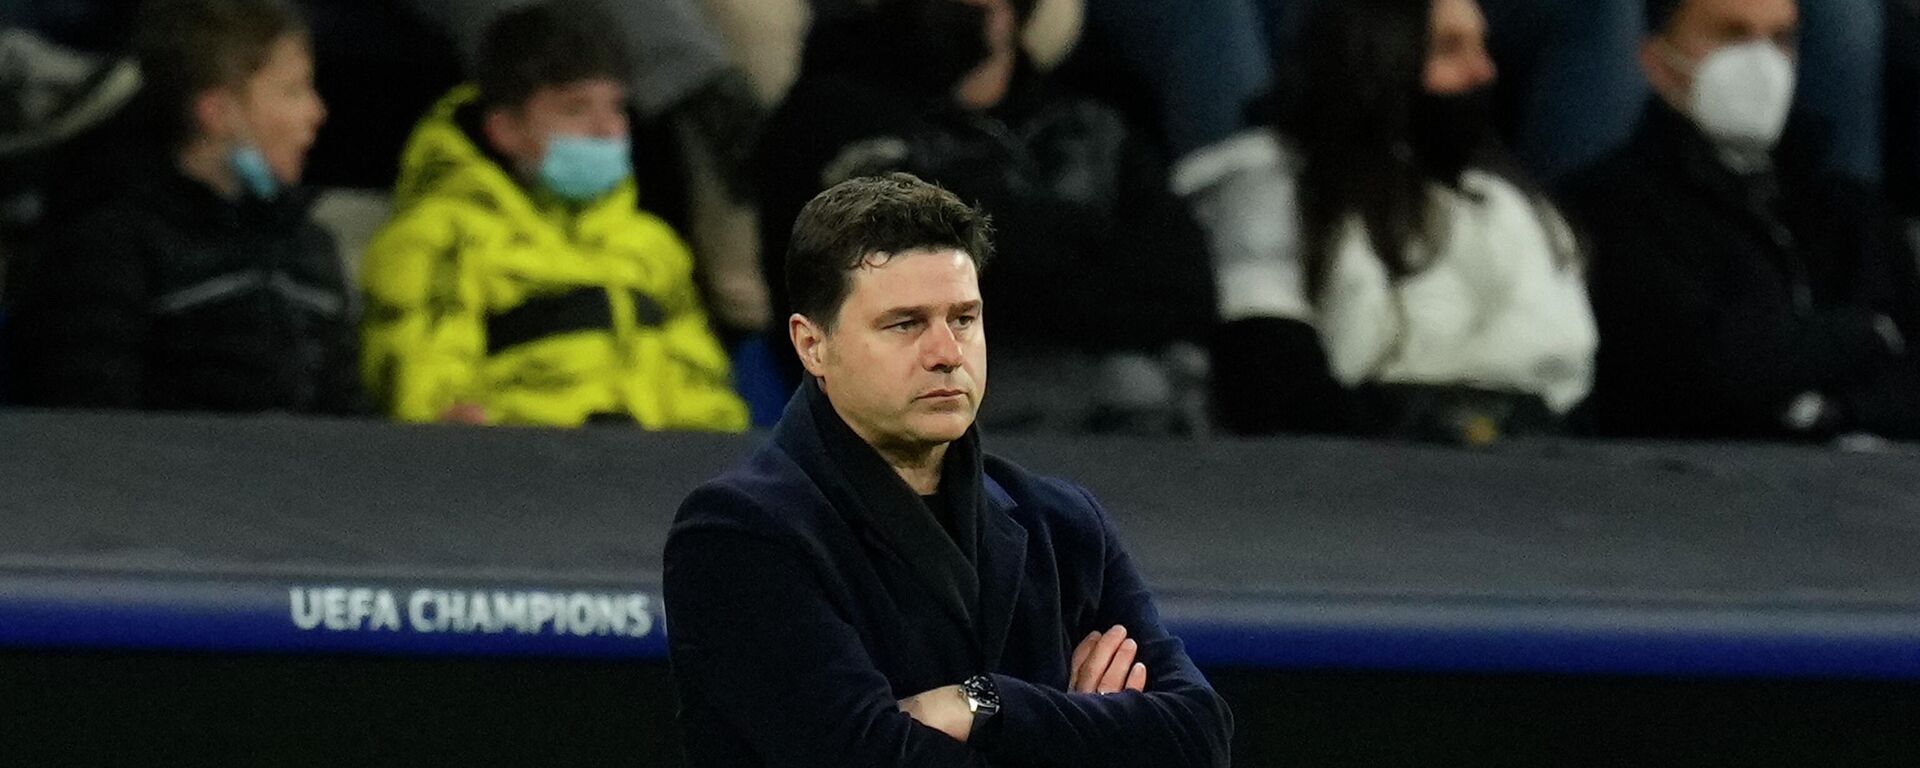 PSG's head coach Mauricio Pochettino watches his players during the Champions League, round of 16, second leg soccer match between Real Madrid and Paris Saint-Germain at the Santiago Bernabeu stadium in Madrid, Spain, Wednesday, March 9, 2022 - Sputnik International, 1920, 01.07.2022